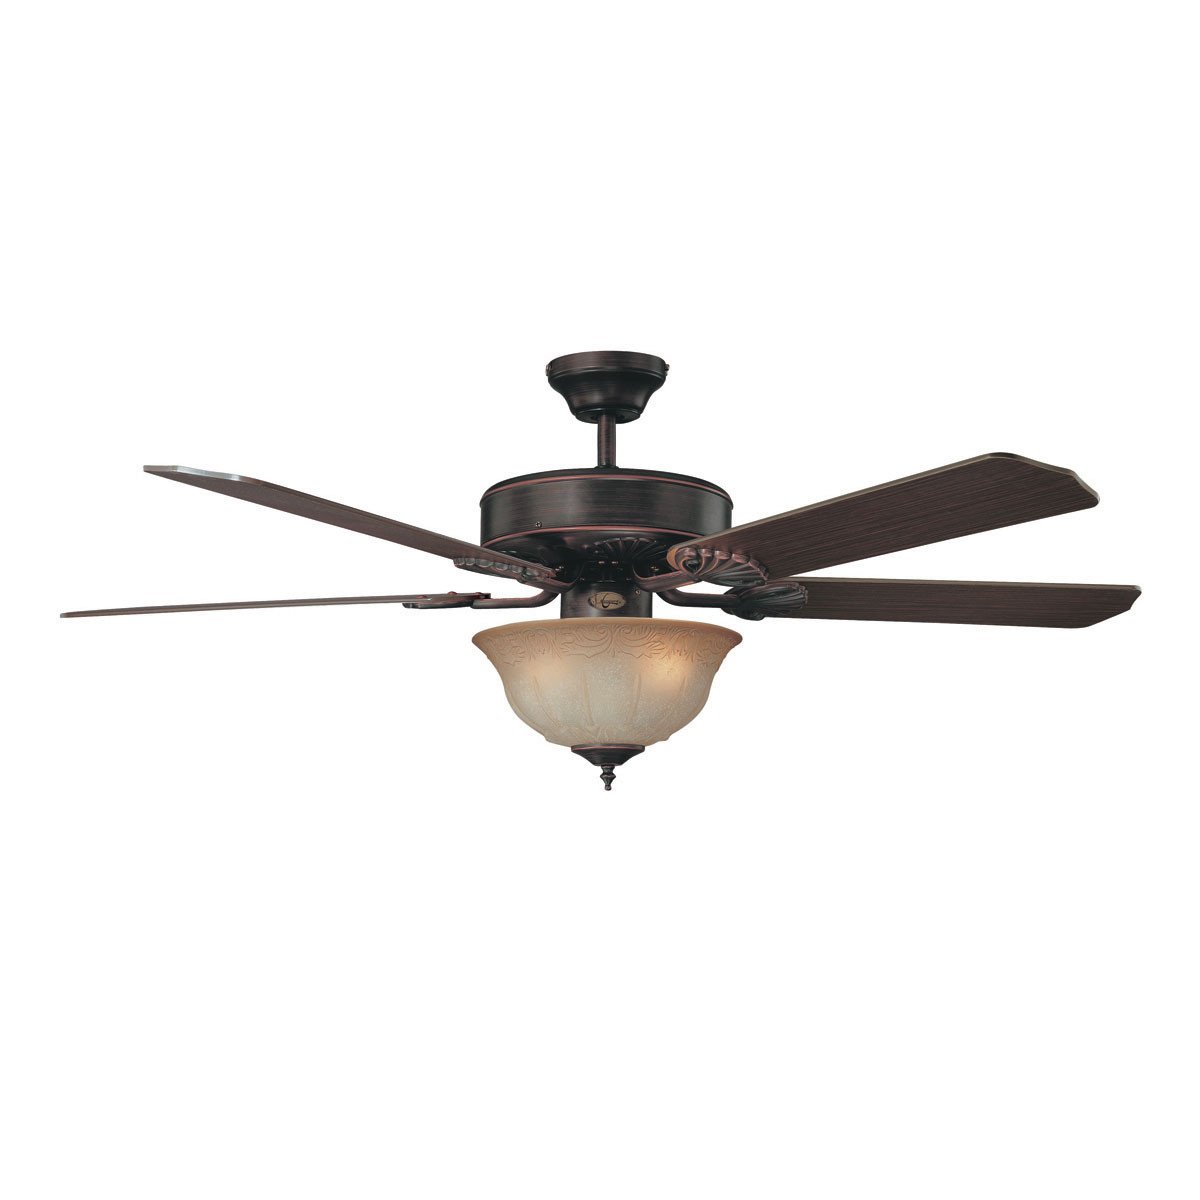 Concord Fans 52" Heritage Designer Oil Rubbed Bronze Ceiling Fan with Light Kit